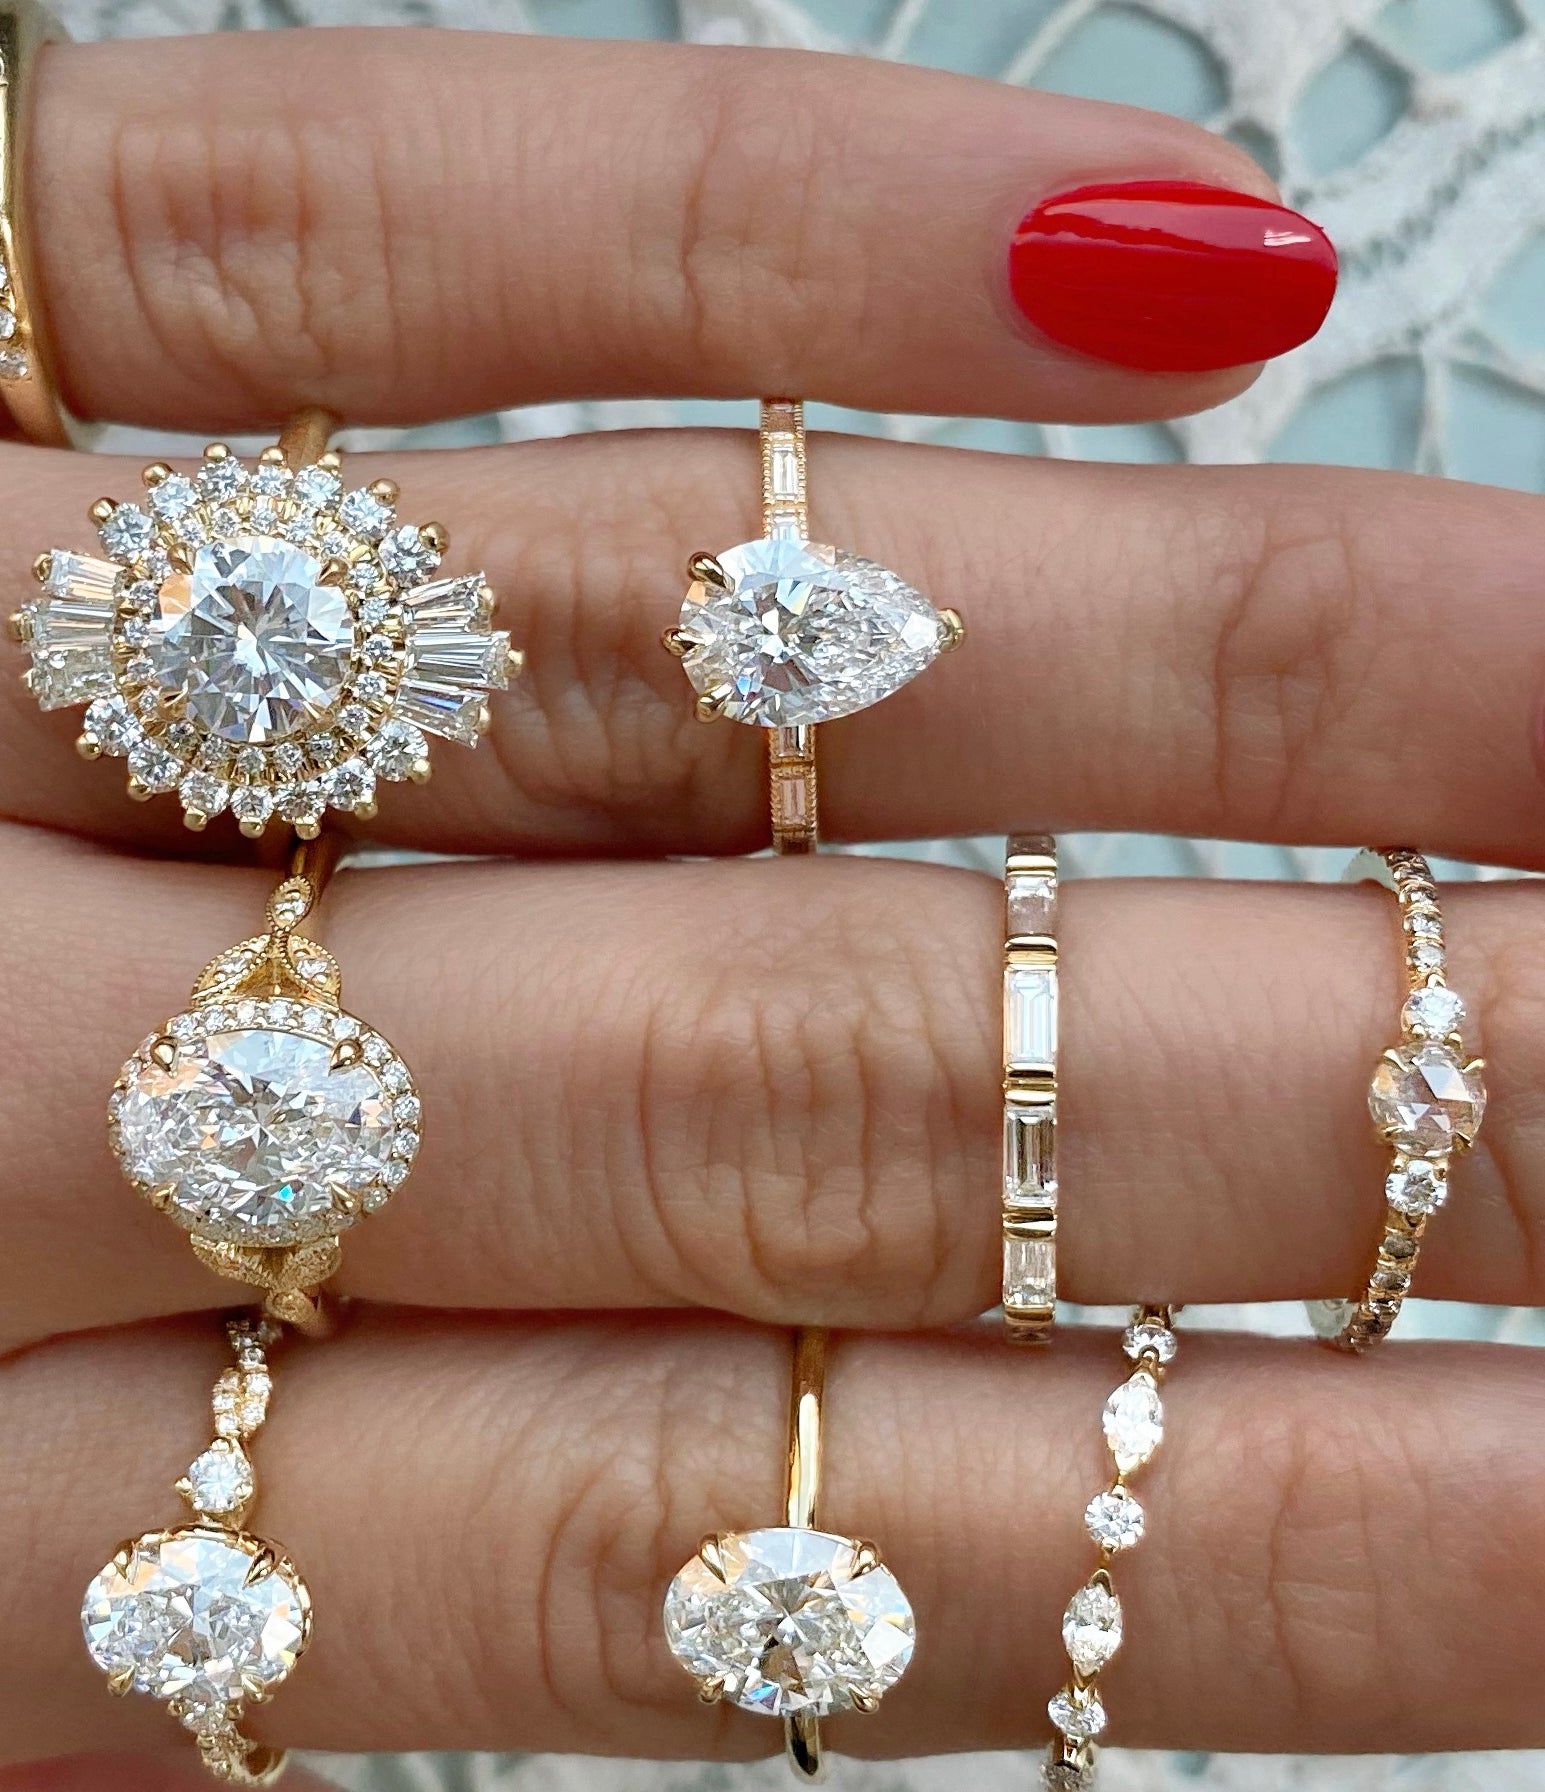 Buy or Sell Rings | The Vault Jewelry & Loan